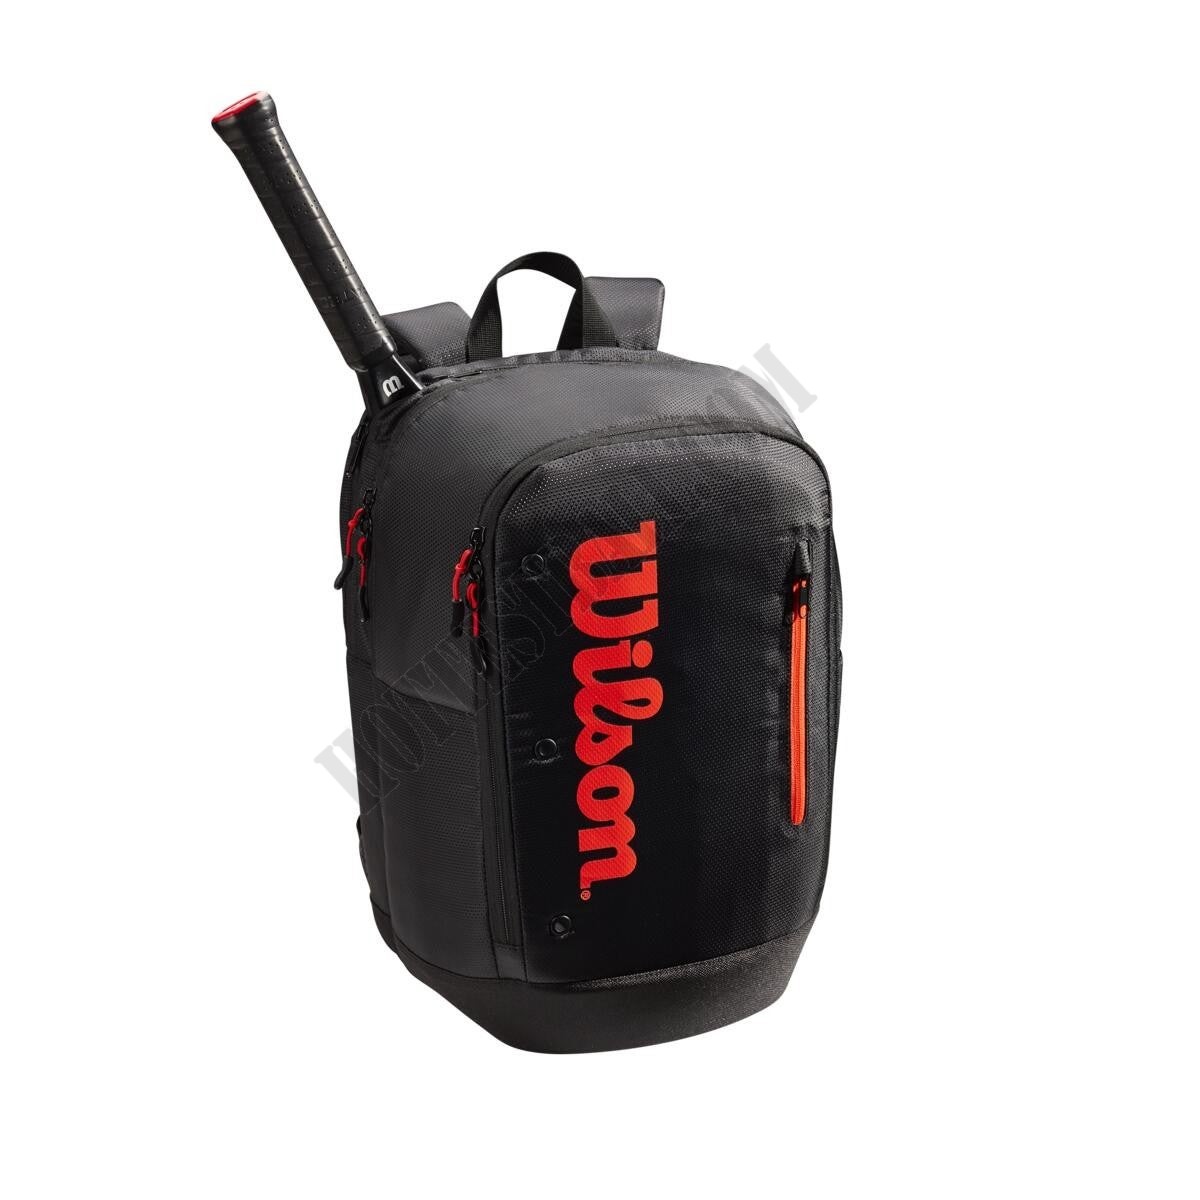 Tour Backpack - Wilson Discount Store - Tour Backpack - Wilson Discount Store